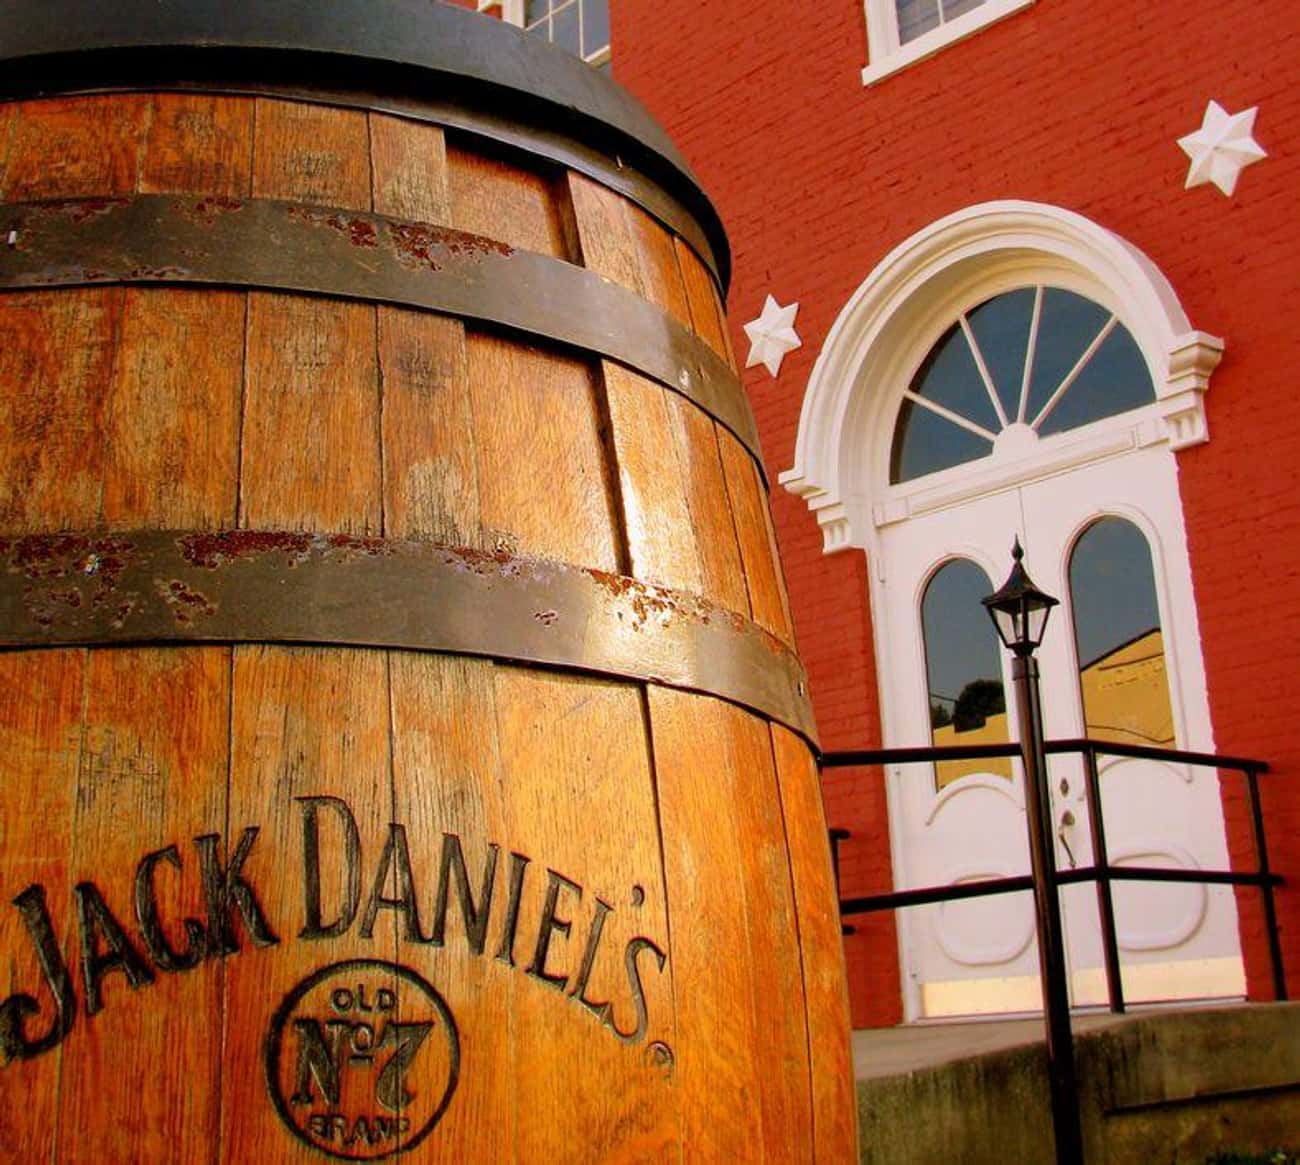 There Are No Dates on the Whiskey Barrels